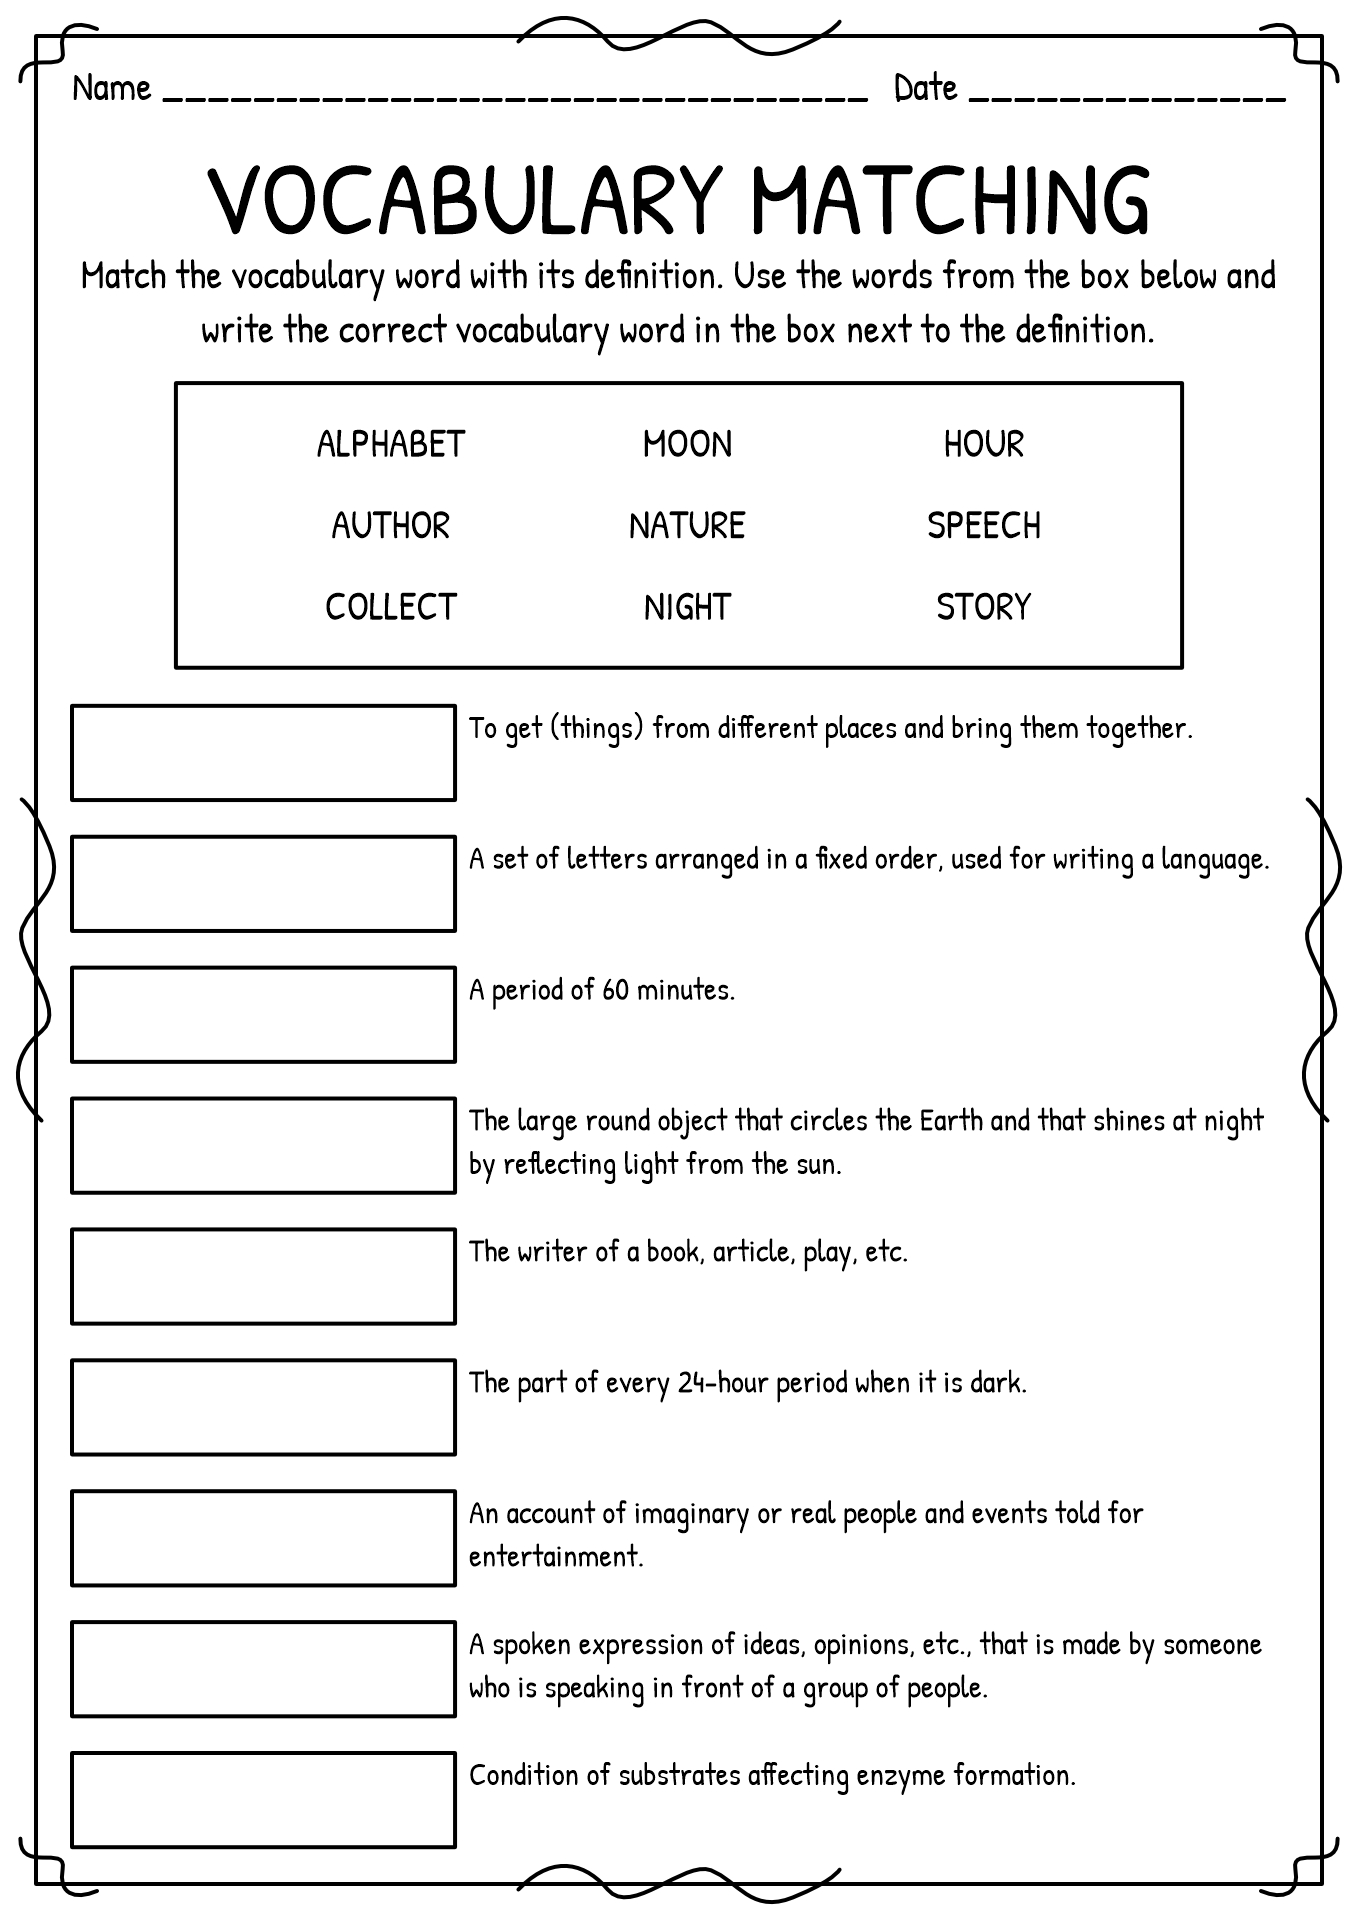 17 Best Images Of Matching Worksheet Template PDF Vocabulary Matching Worksheet Template